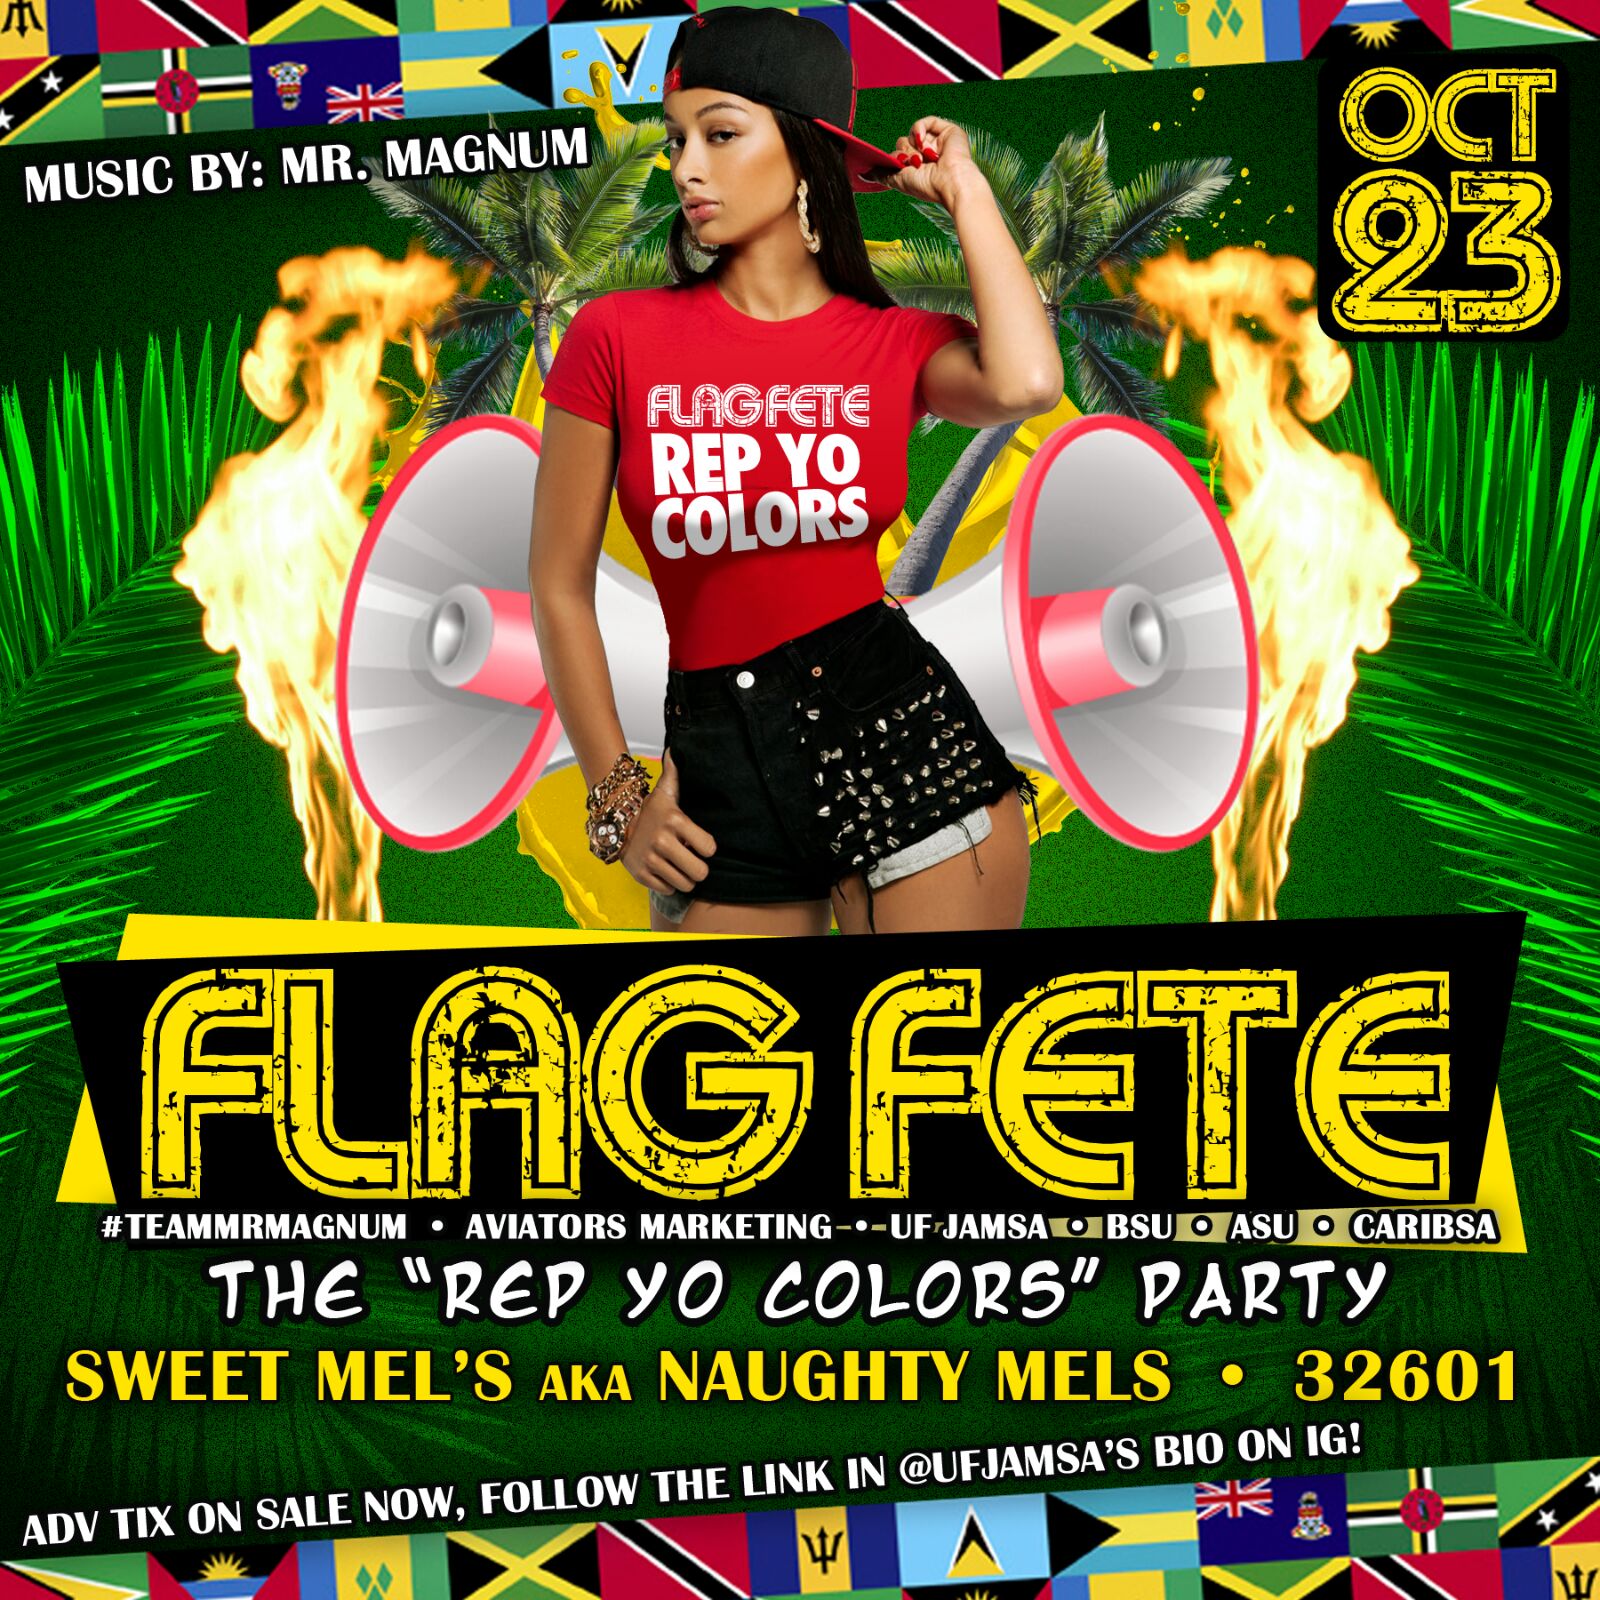 JamSA's Flag Fete 2015 with Music by Mr. Magnum